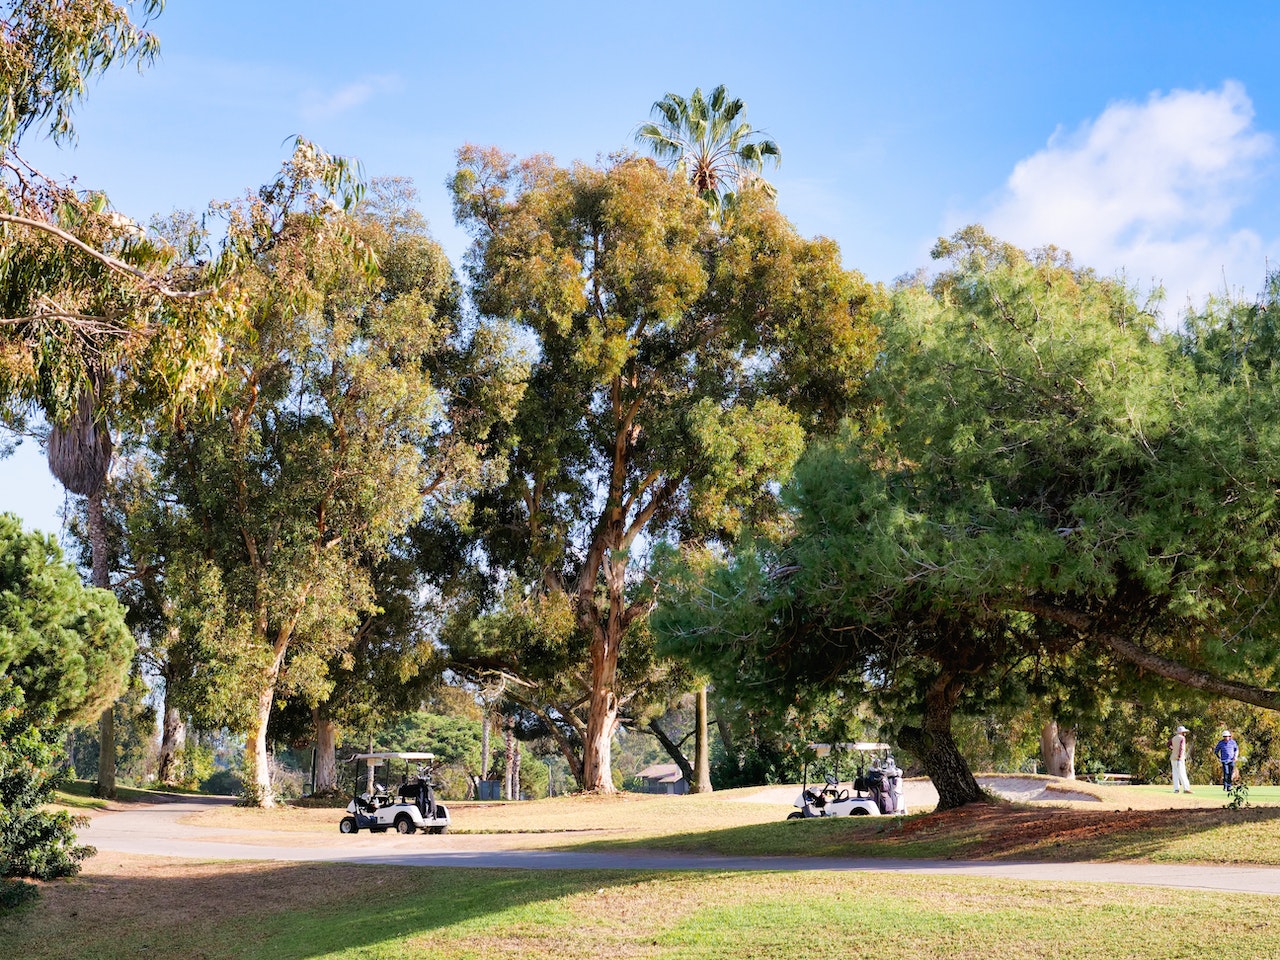 Golf Carts Parked Under the Tree | Veteran Car Donations
